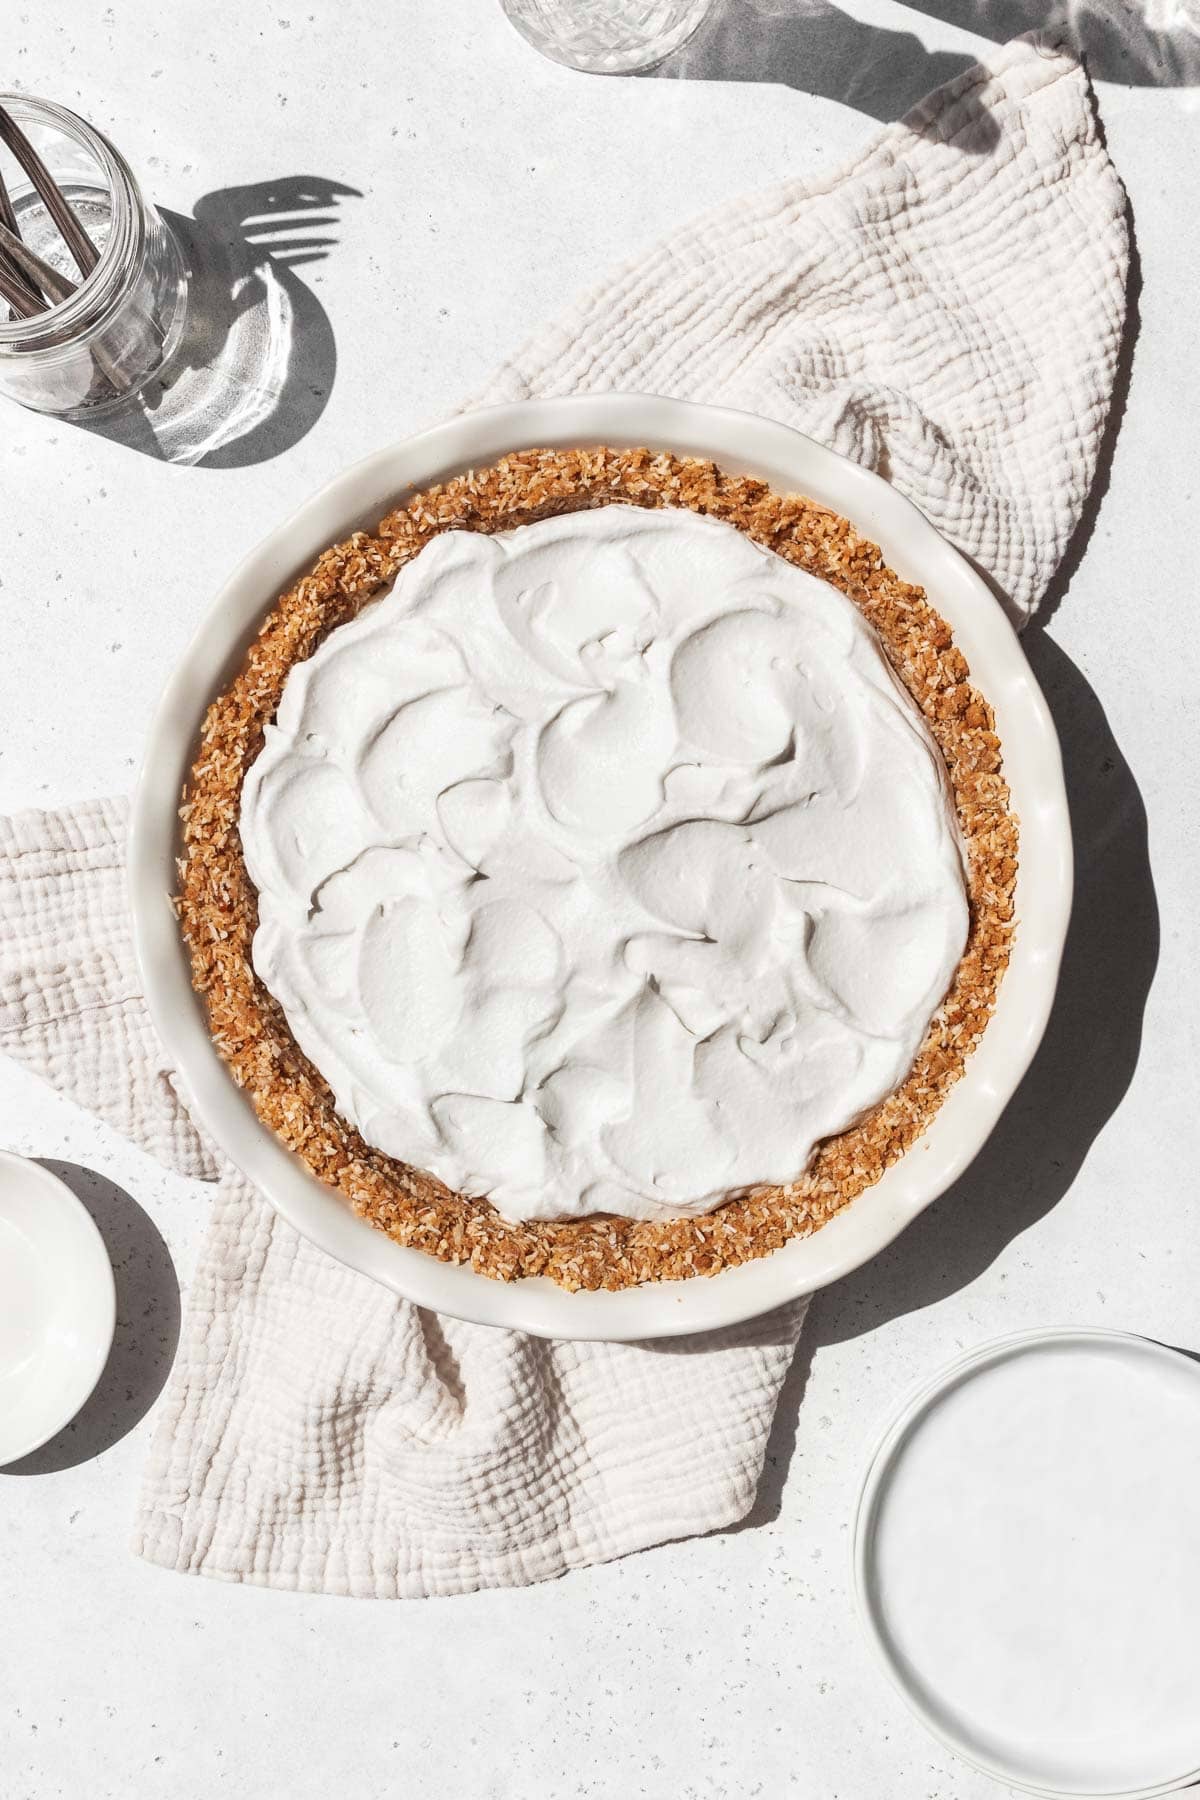 Whipped coconut cream swooshed on top of the vegan coconut custard in the gluten-free pie shell.